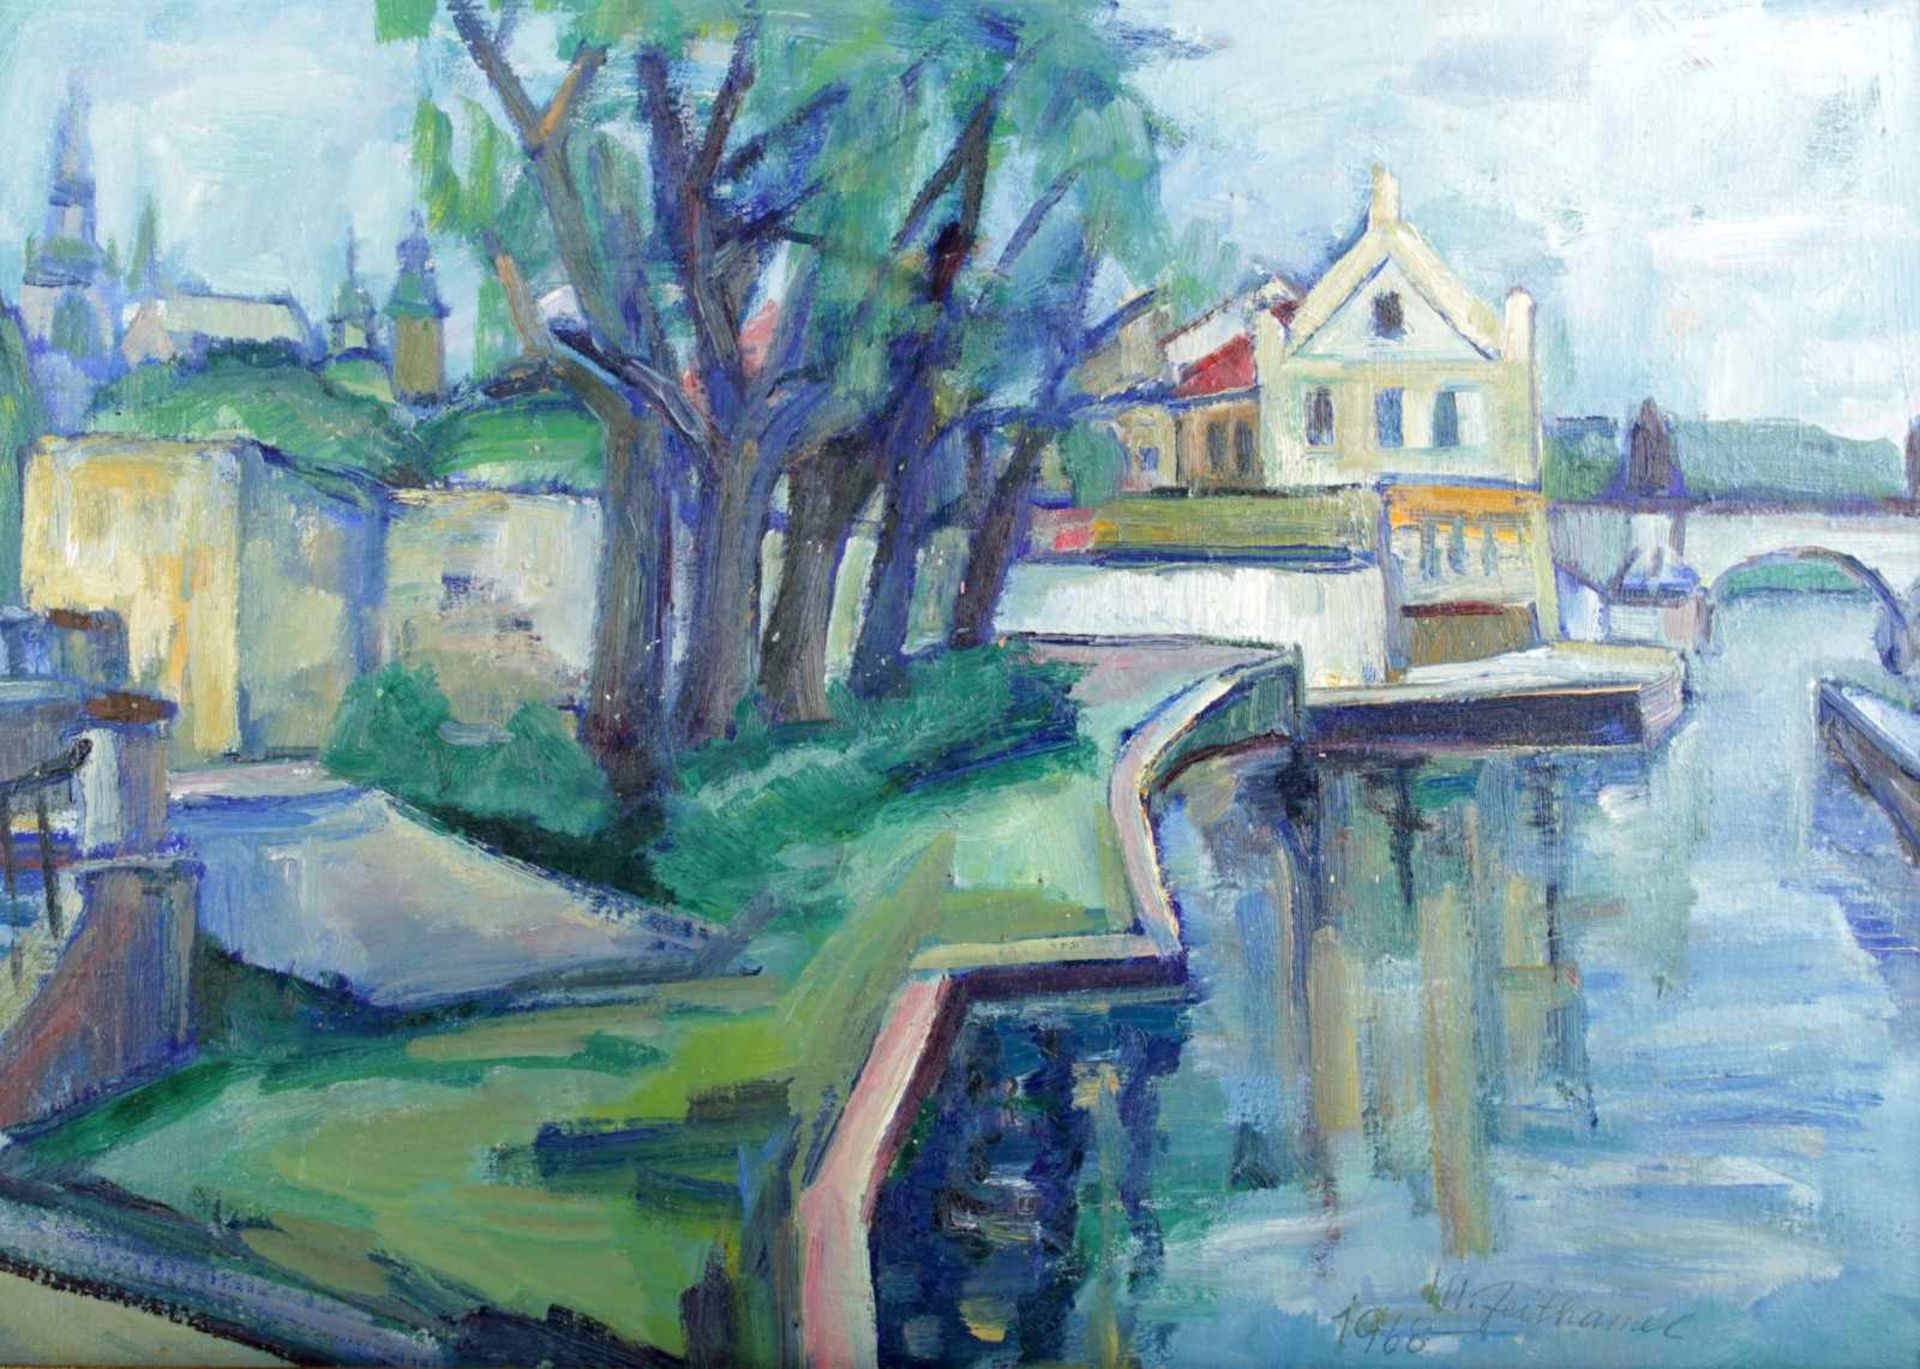 Zeithammel Miloš st. (1935) Prague - Kampa, 1968, oil on canvas, signed and dated lower right M.